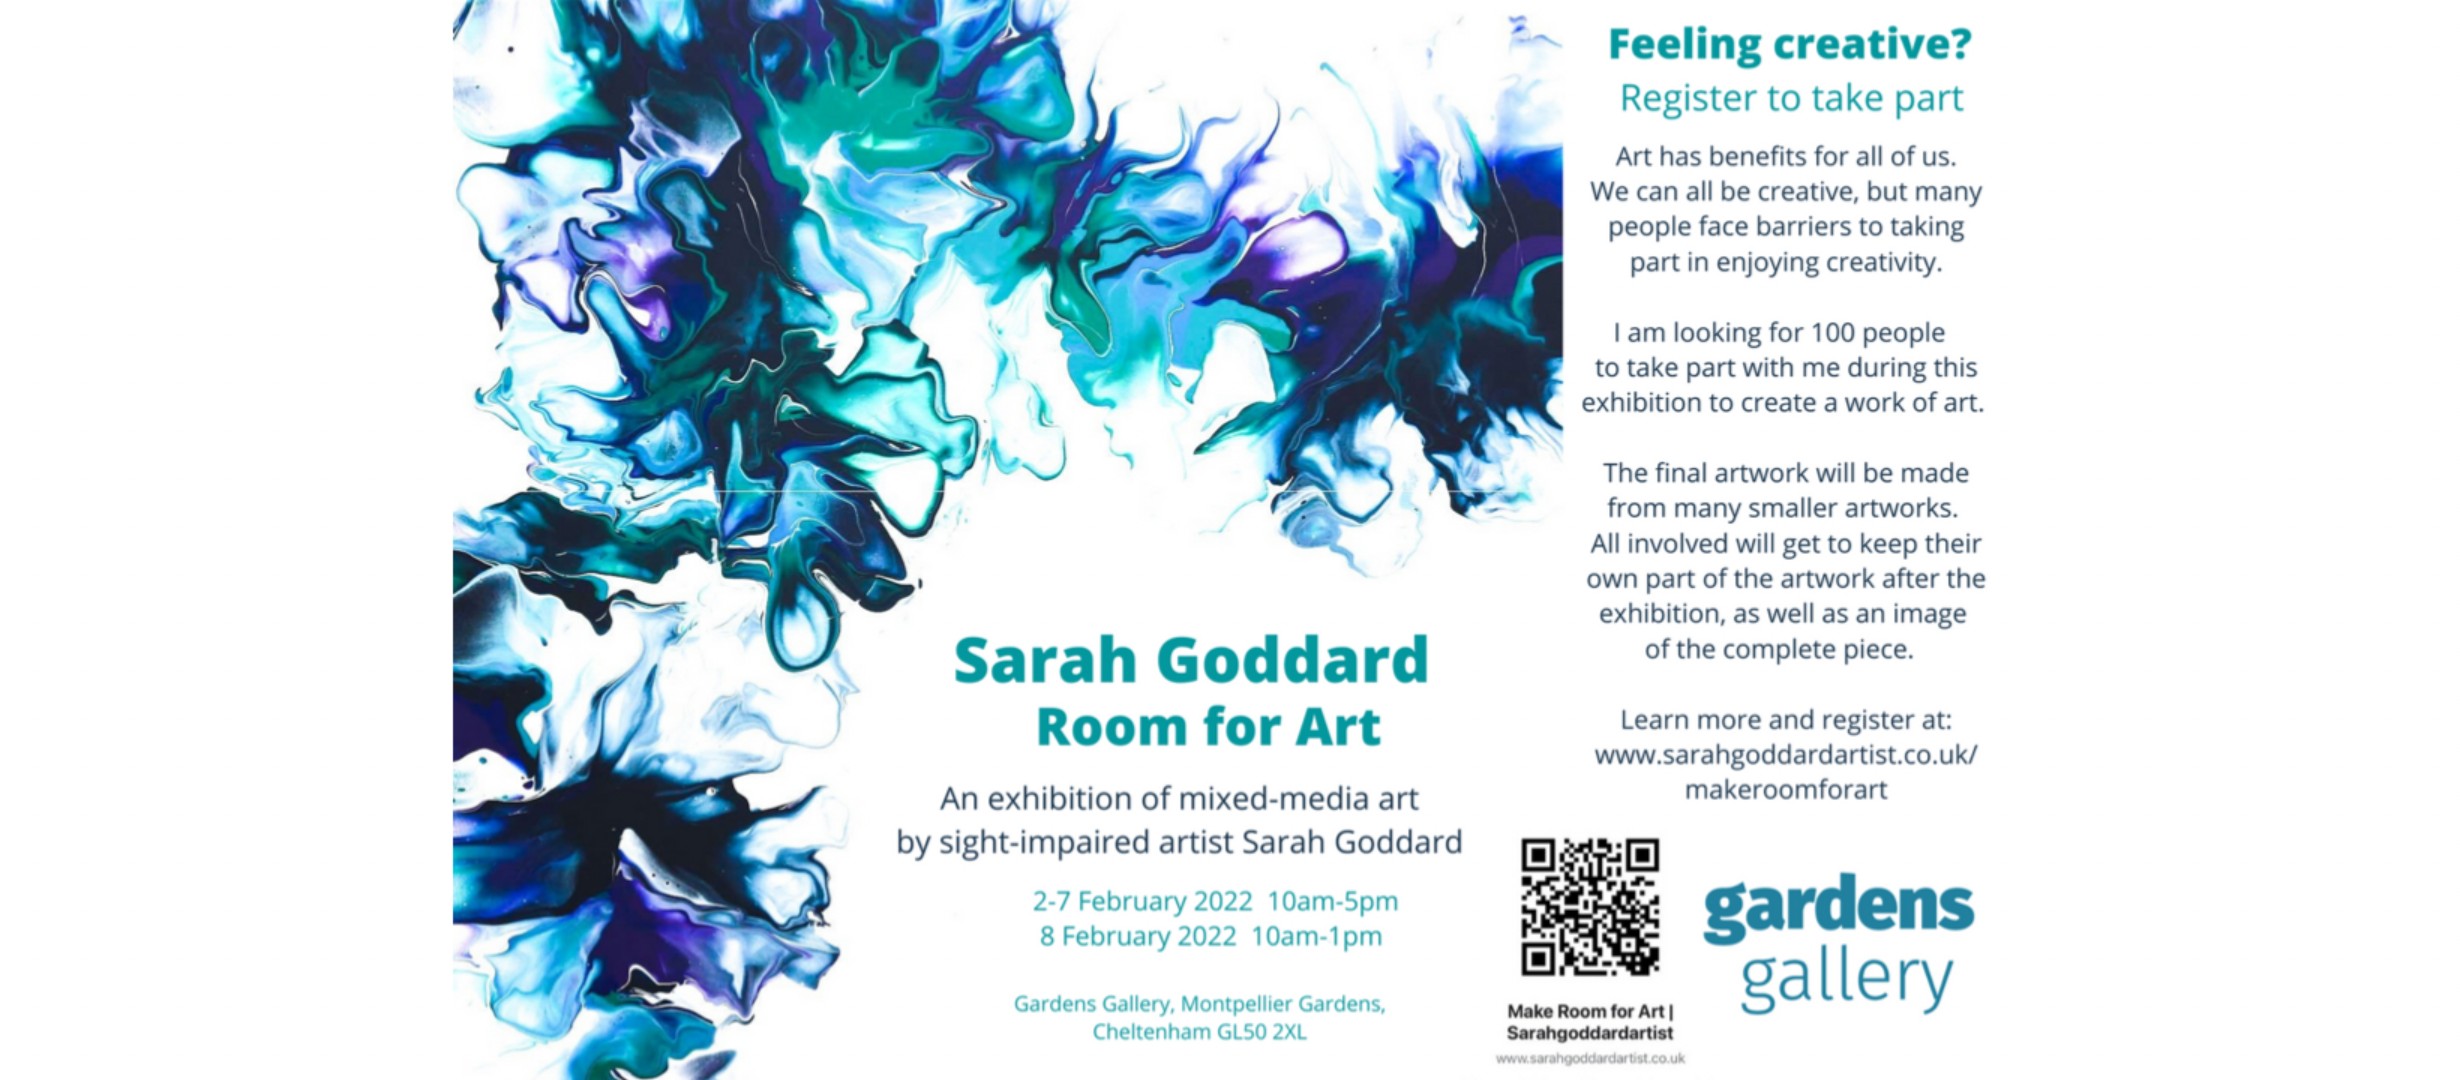 Sarah Goddard. Room for Art. An exhibition of mixed-media art by sight-impaired artist Sarah Goddard. 2-7 February 2022 10am-5pm. 8 February 2022 10am-1pm. Gardens Gallery, Montpellier Gardens, Cheltenham GL50 2XL. Feeling creative? Register to take part. Art has benefits for all of us. We can all be creative, but many people face barriers to taking part in enjoying creativity. I am looking for 100 people to take part with me during this exhibition to create a work of art. The final artwork will be made fro